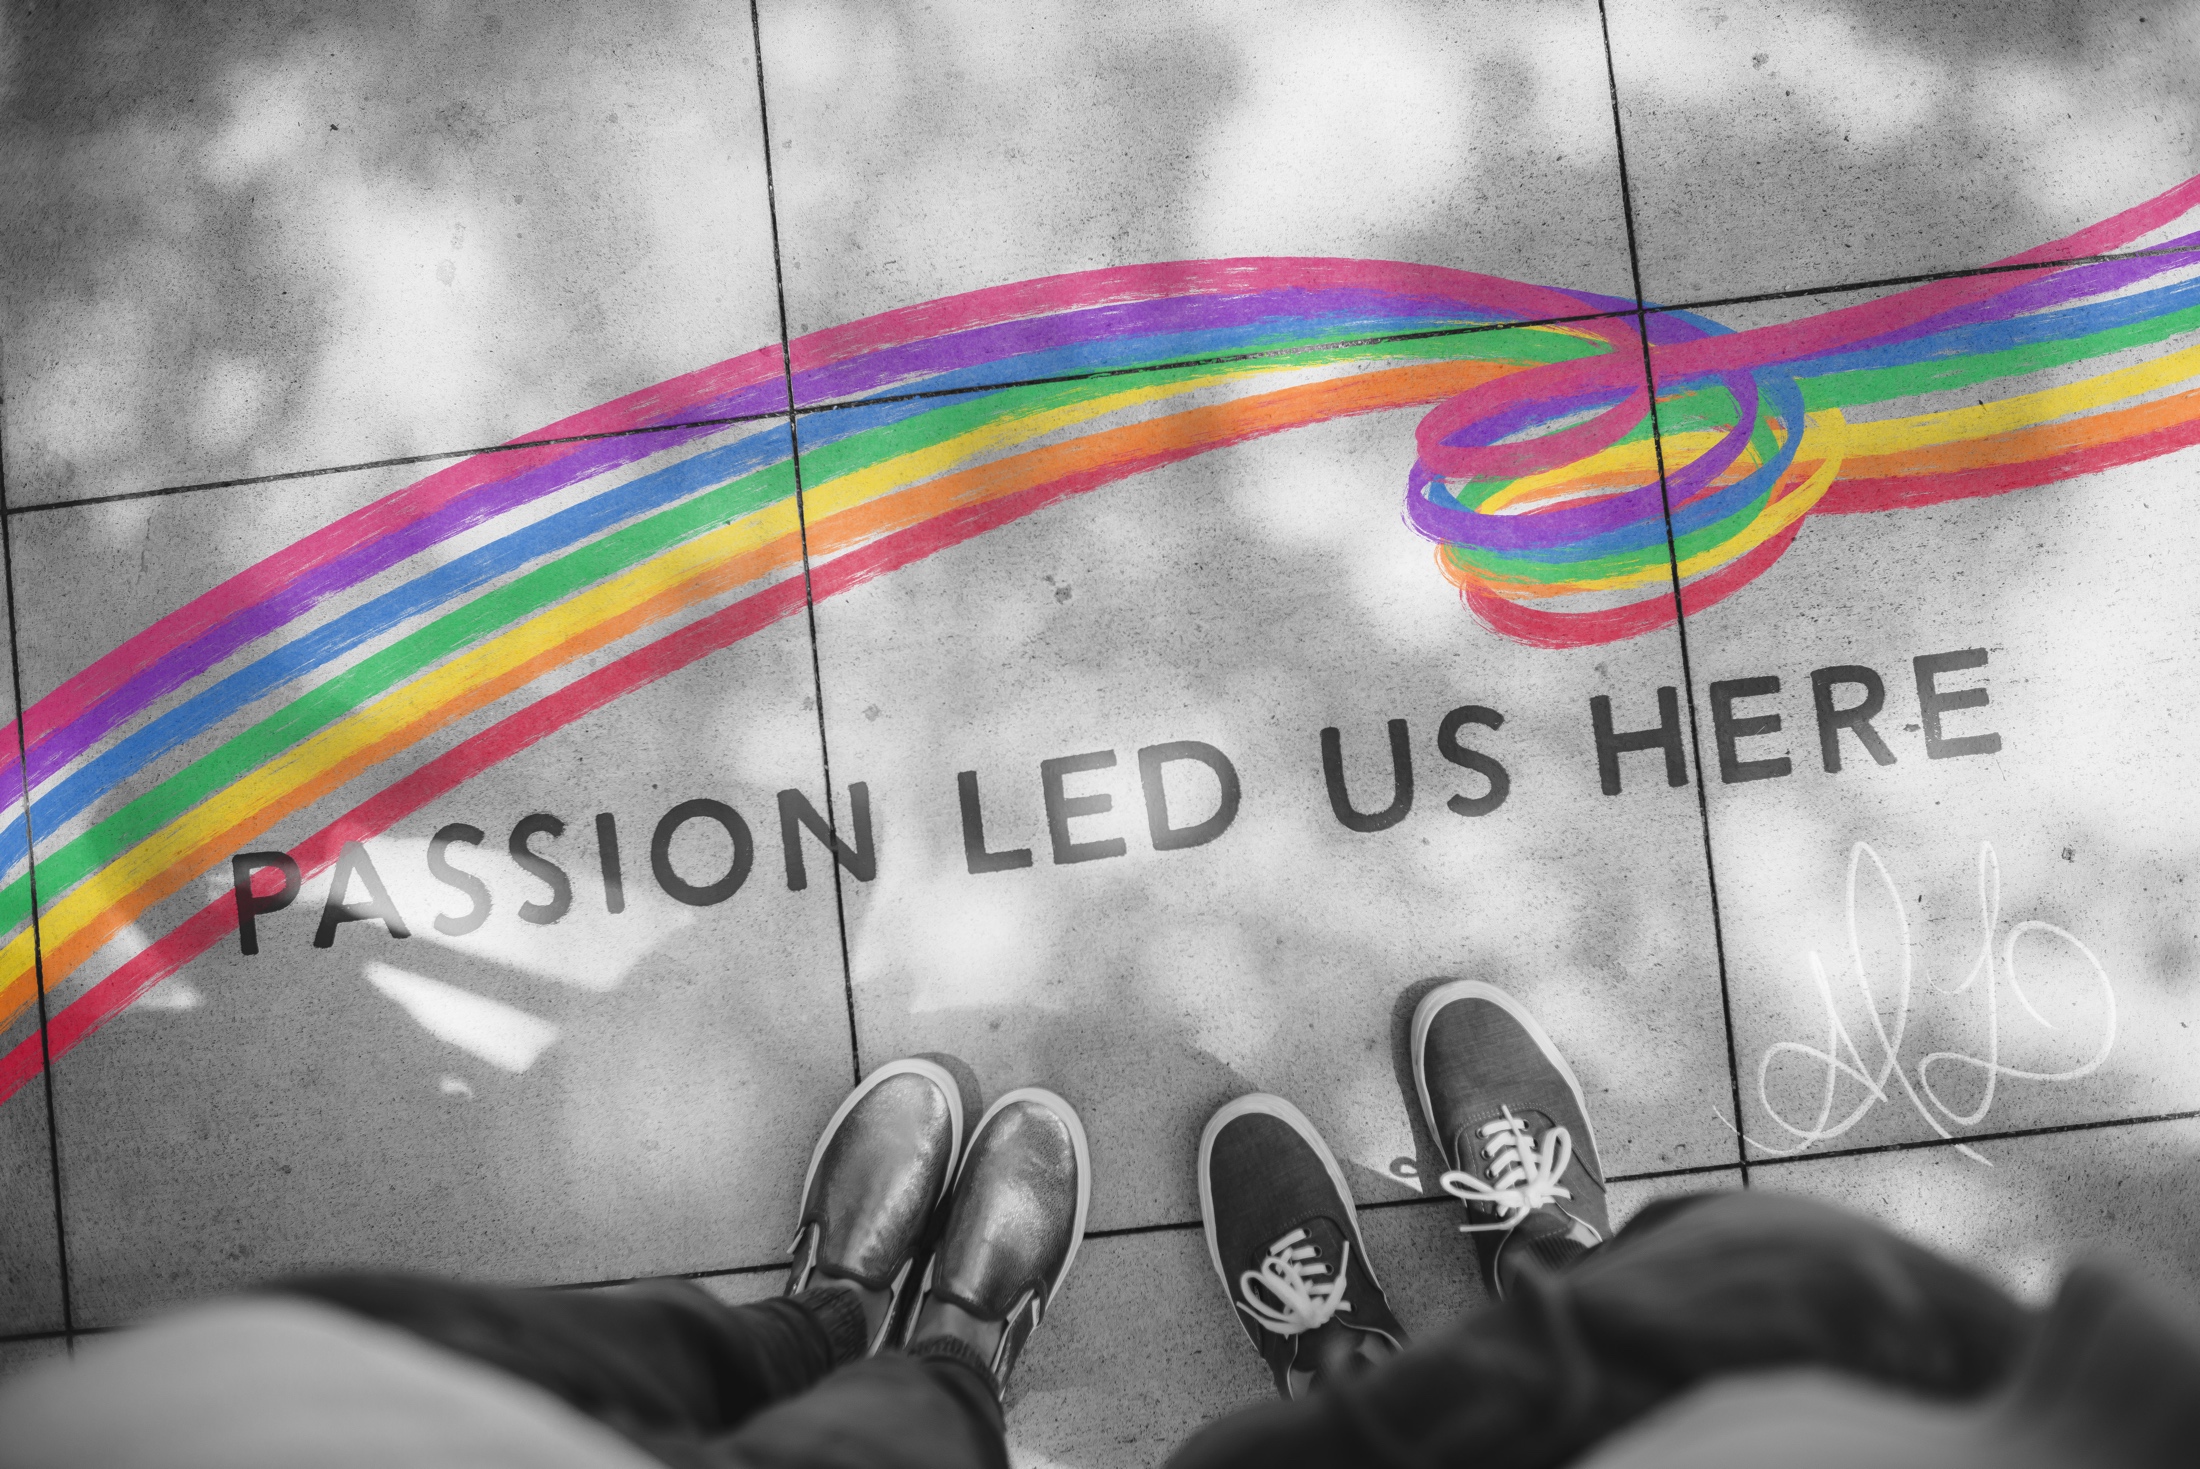 A sidewalk covered in swirling rainbow chalk art and block text that says Passion Lead Us Here